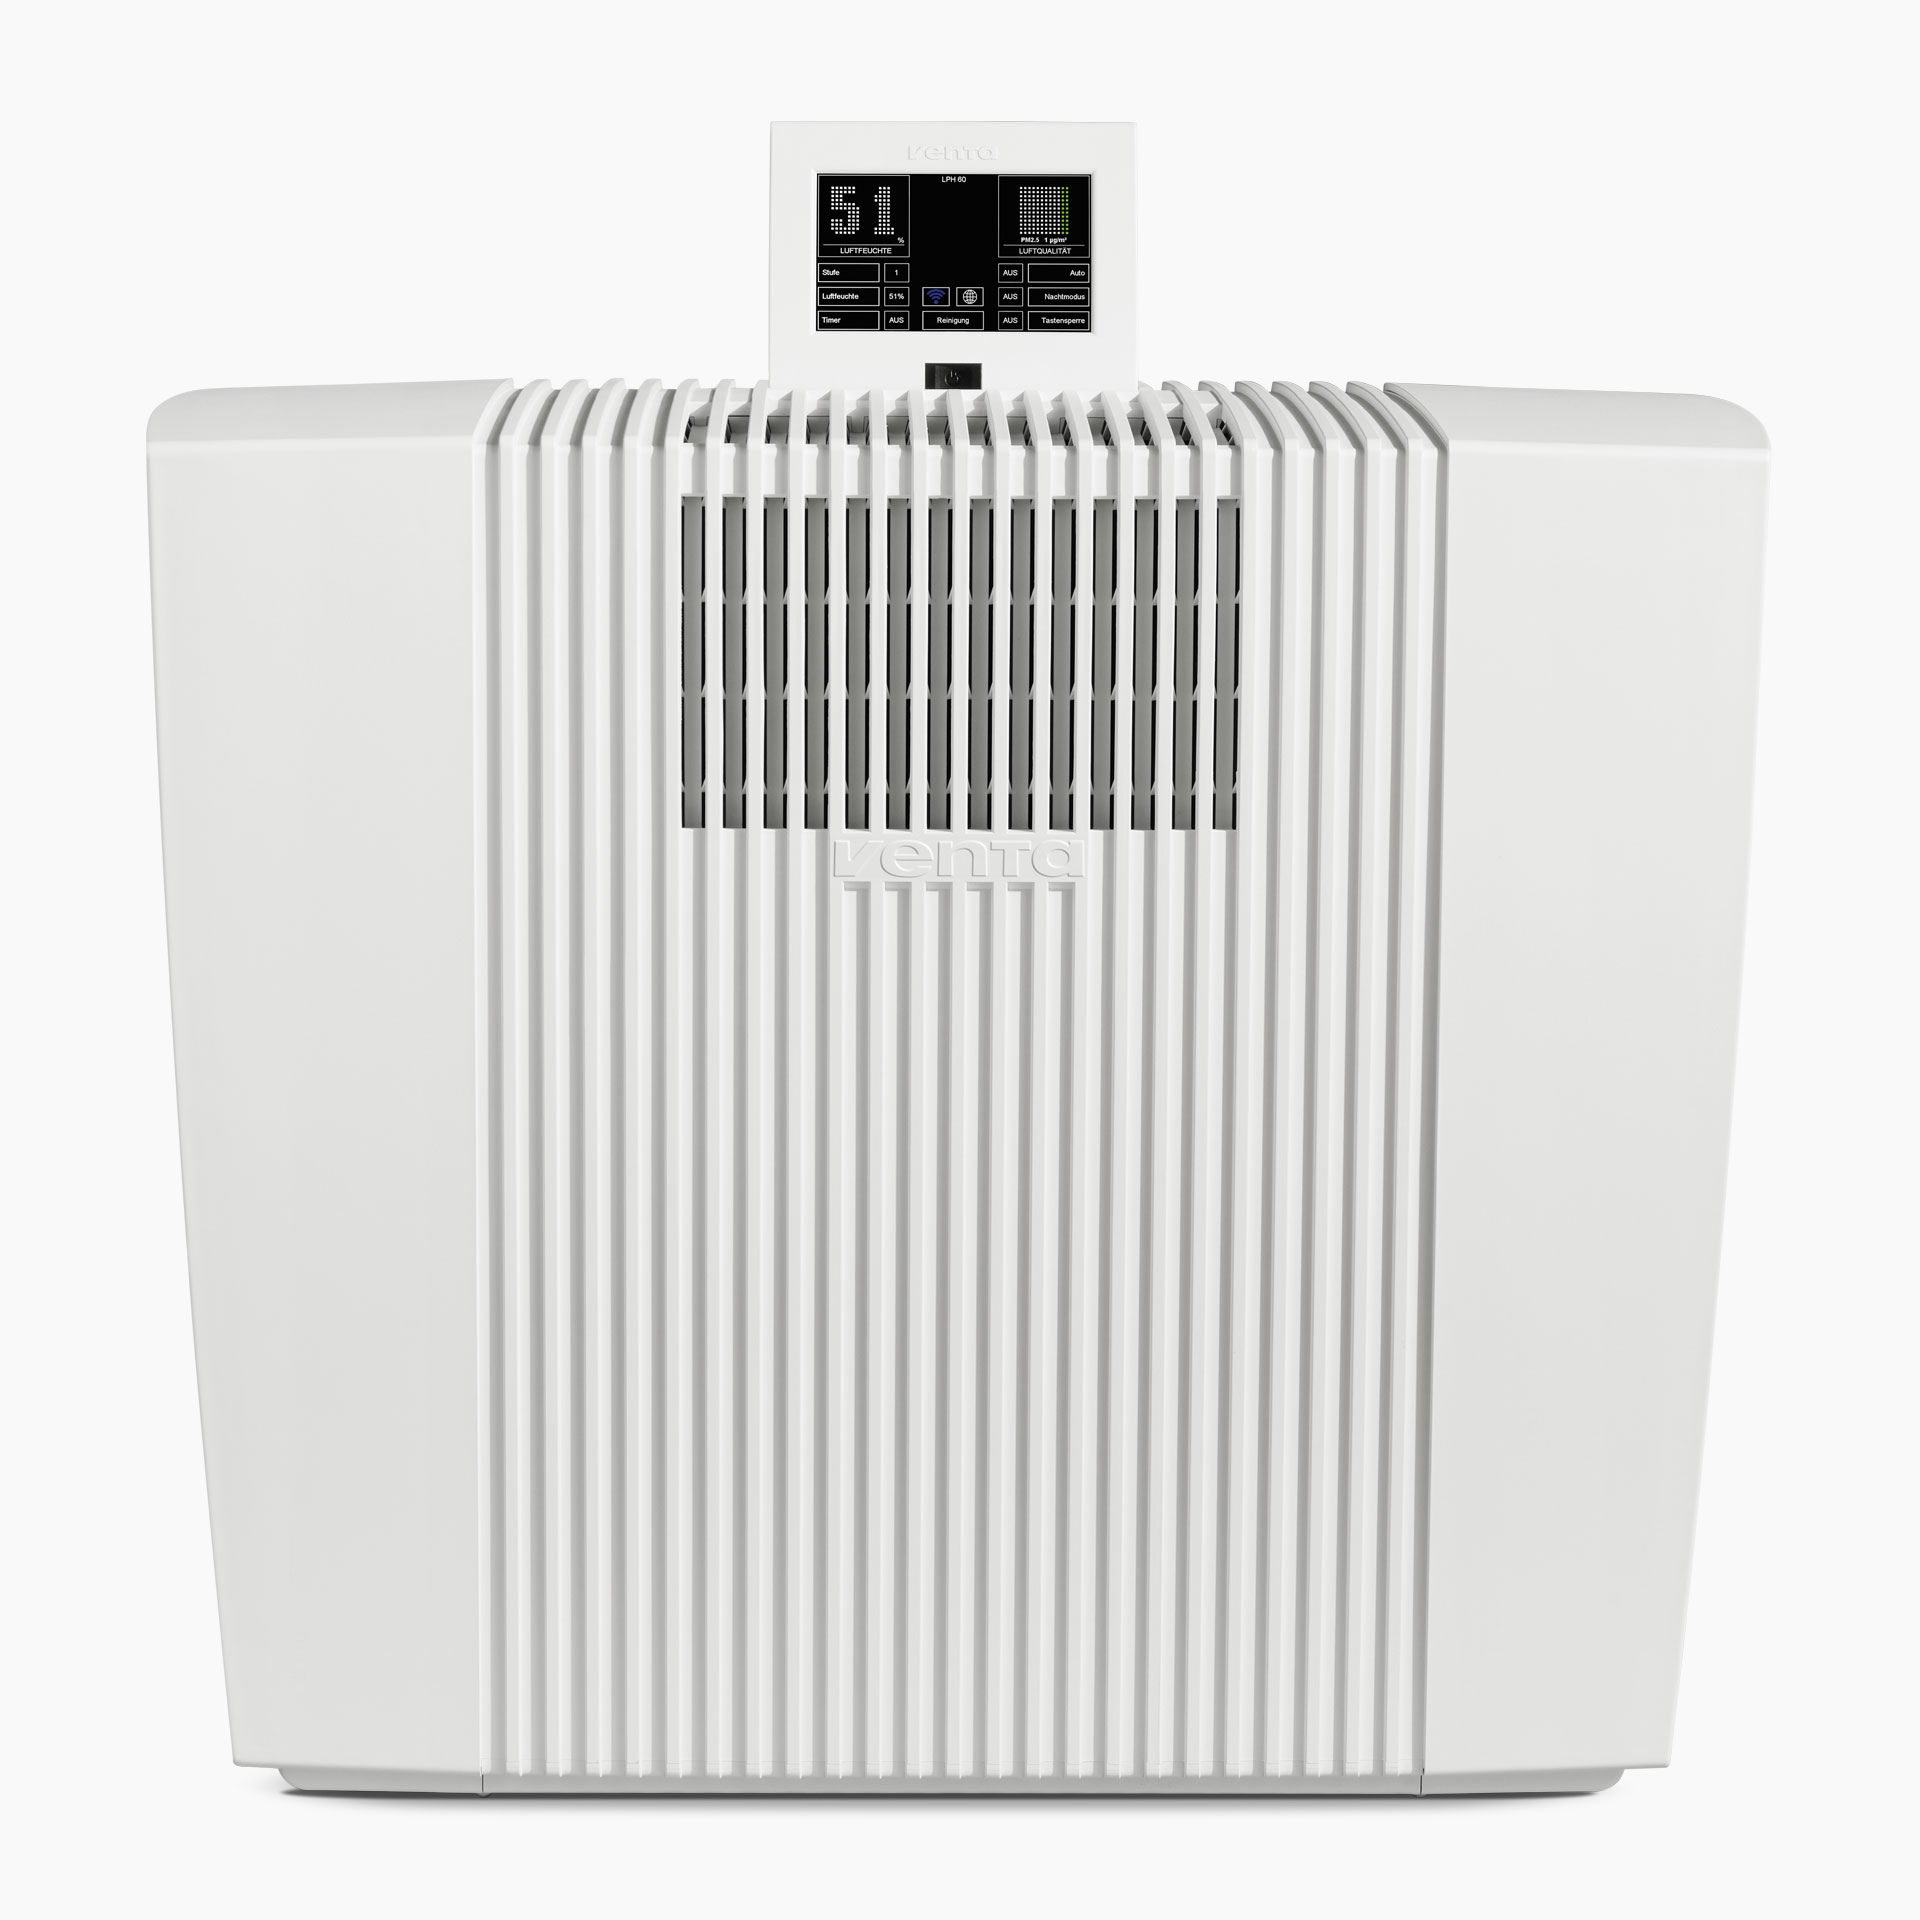 LPH60 WiFi App Control  Airwasher - Limited White Edition